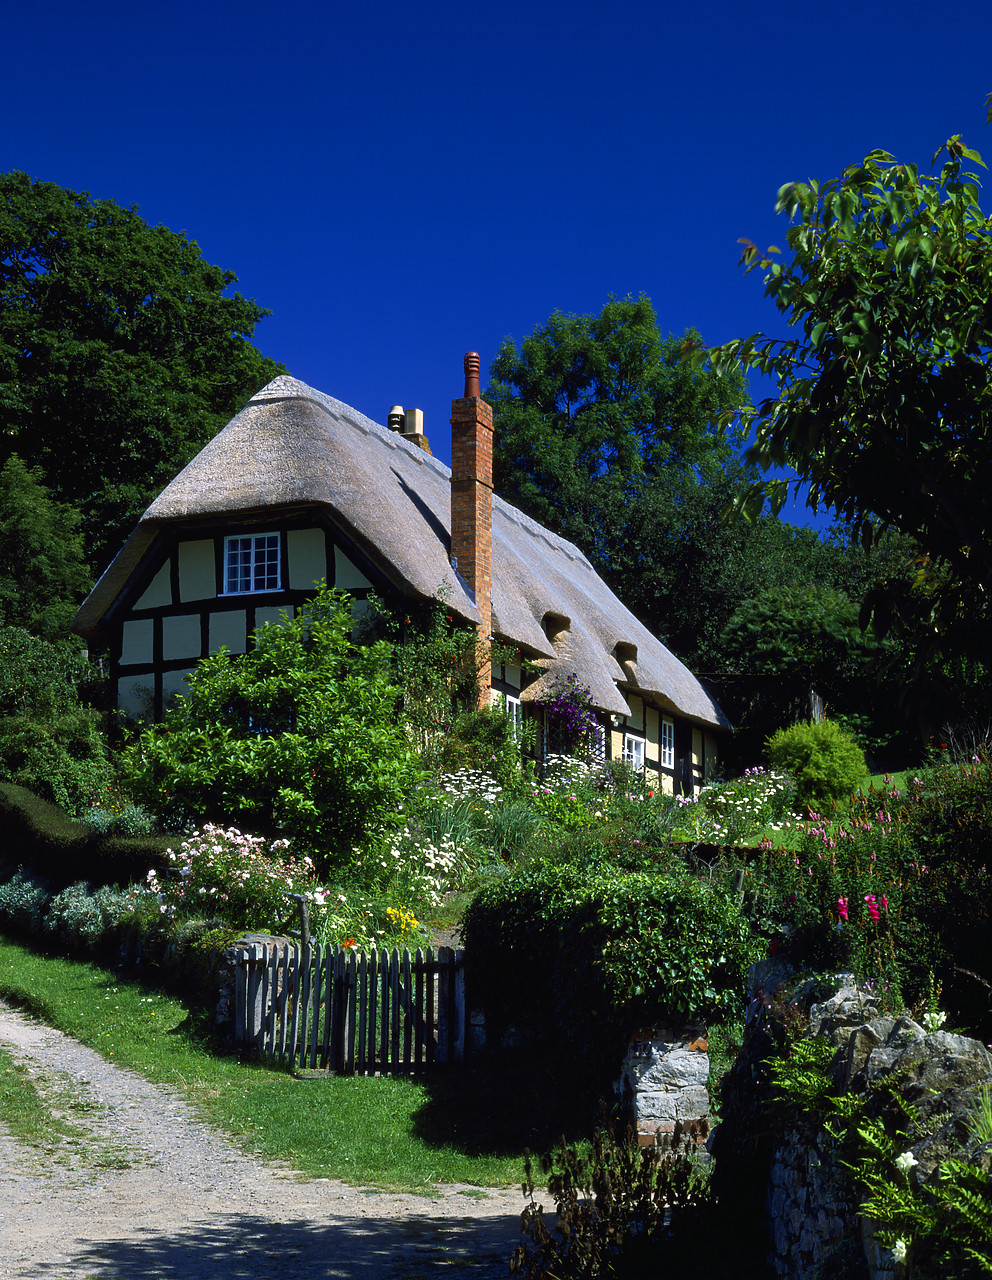 #881518-2 - Thatched Cottage, Eastnor, Herefordshire, England